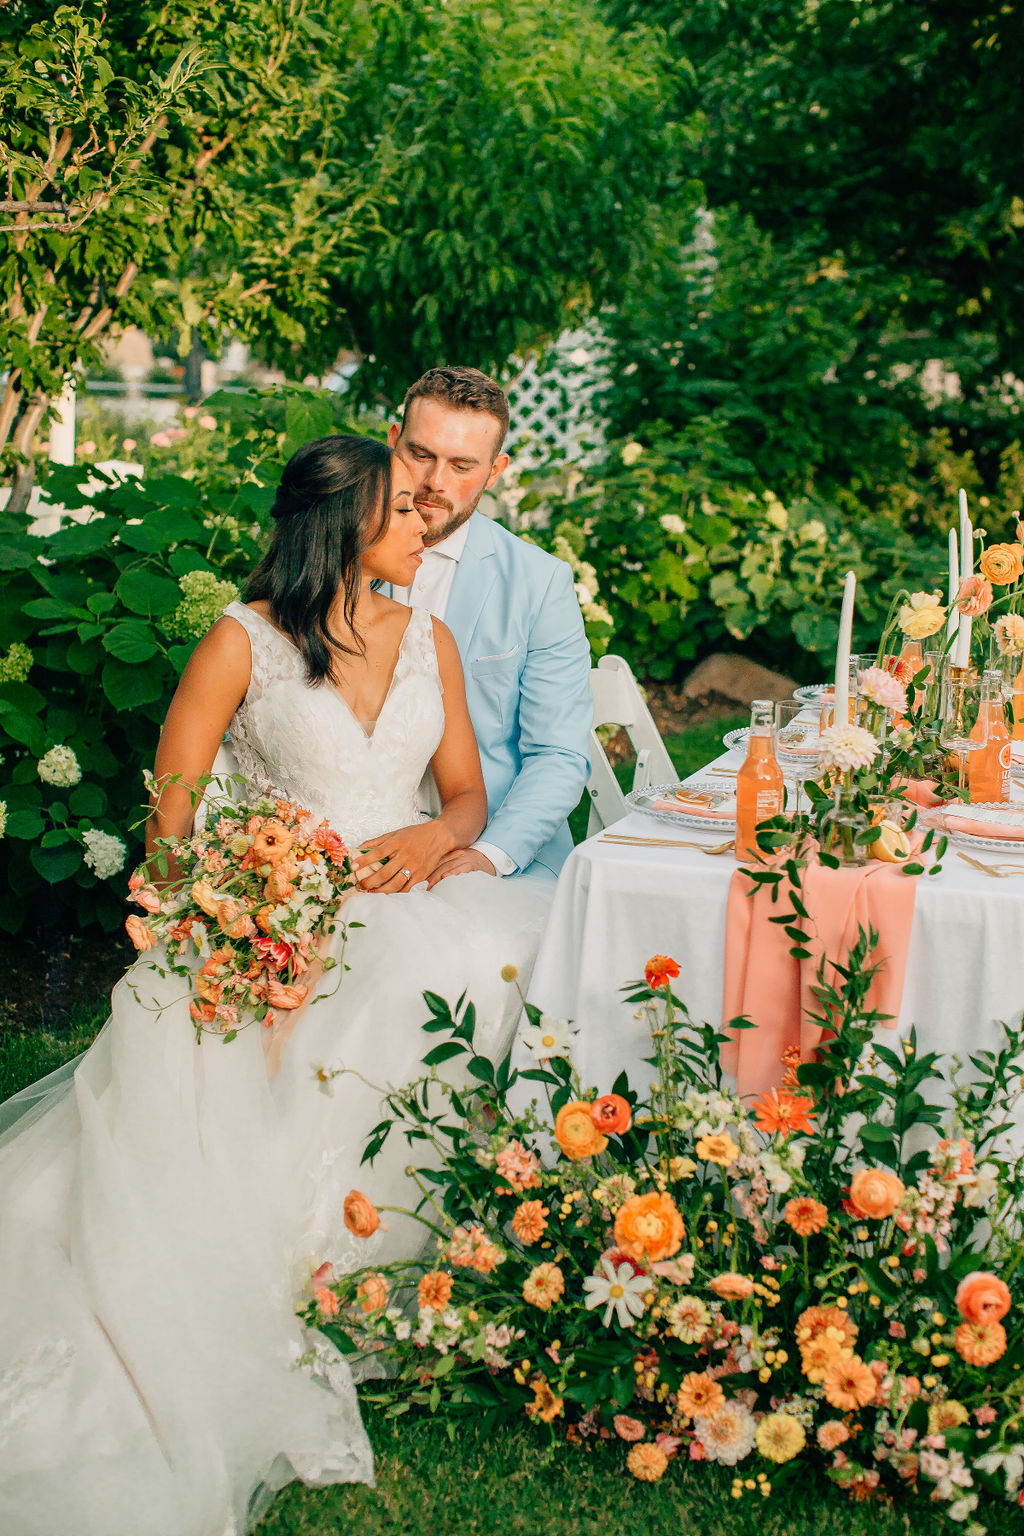 Bride and groom sit close alongside a citrus summer-inspired wedding tablescale filled with fruity peach pink and orange accents outside in a garden #citrusgardenwedding #gardenwedding #citrusweddingdesign #weddingdesignerslc